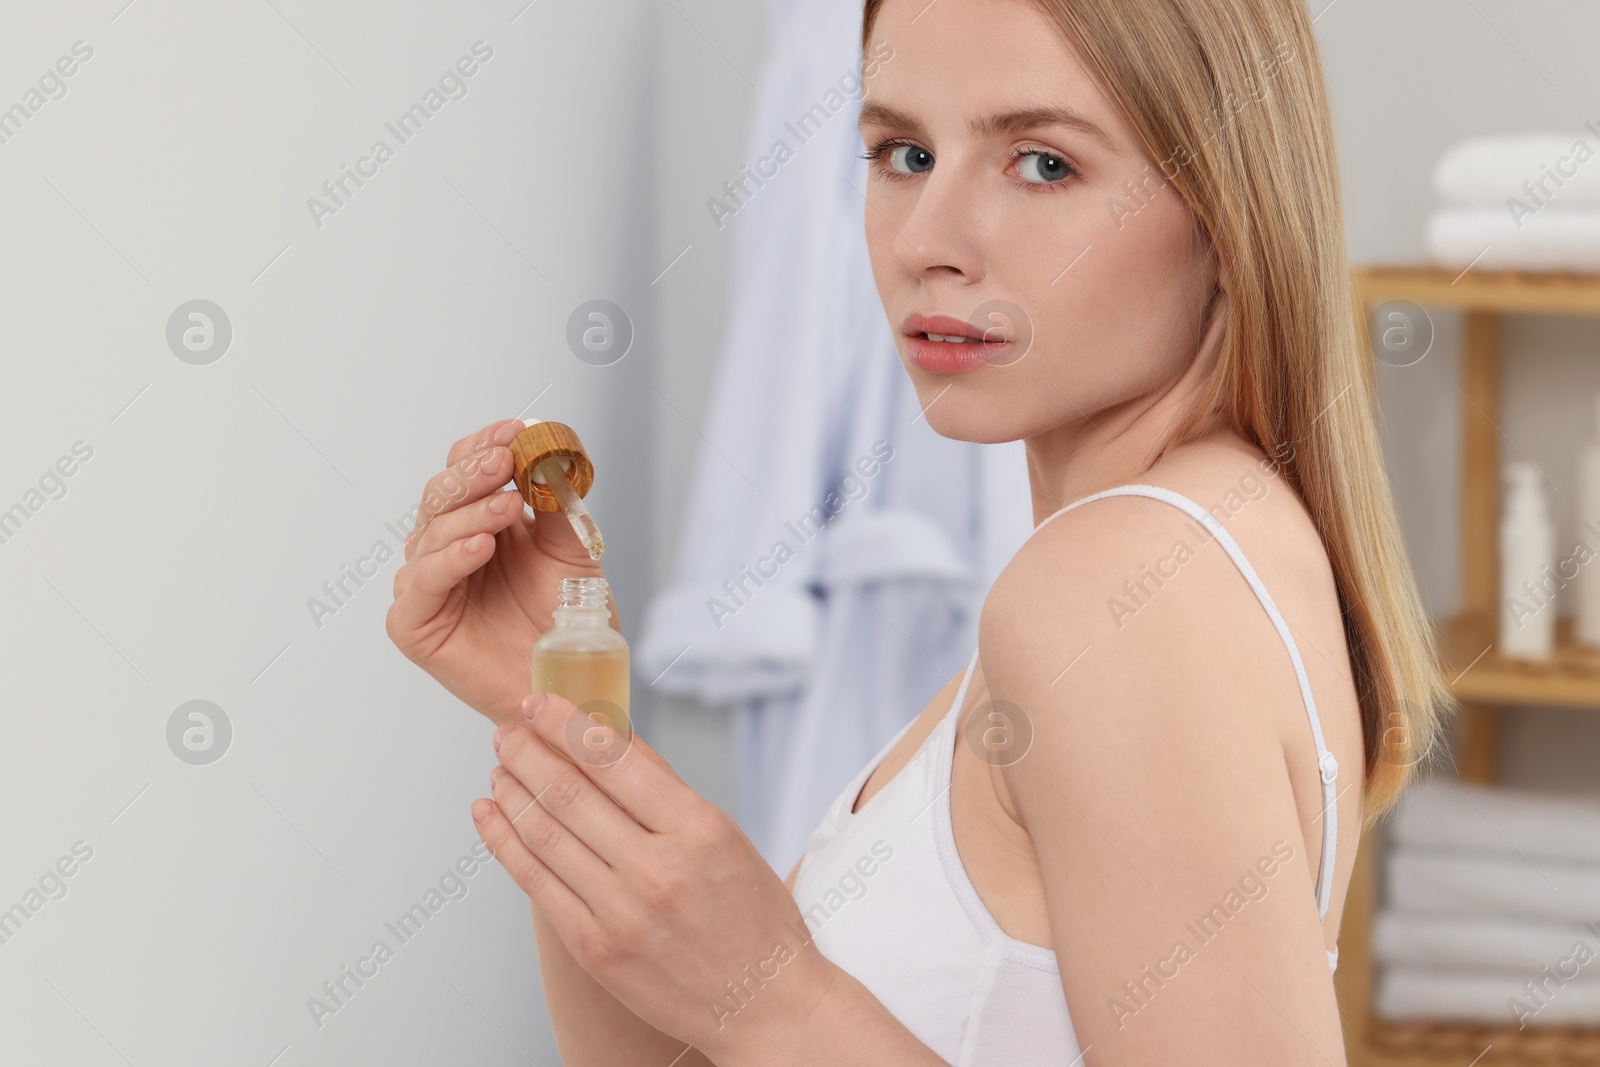 Photo of Woman with bottle of essential oil in bathroom